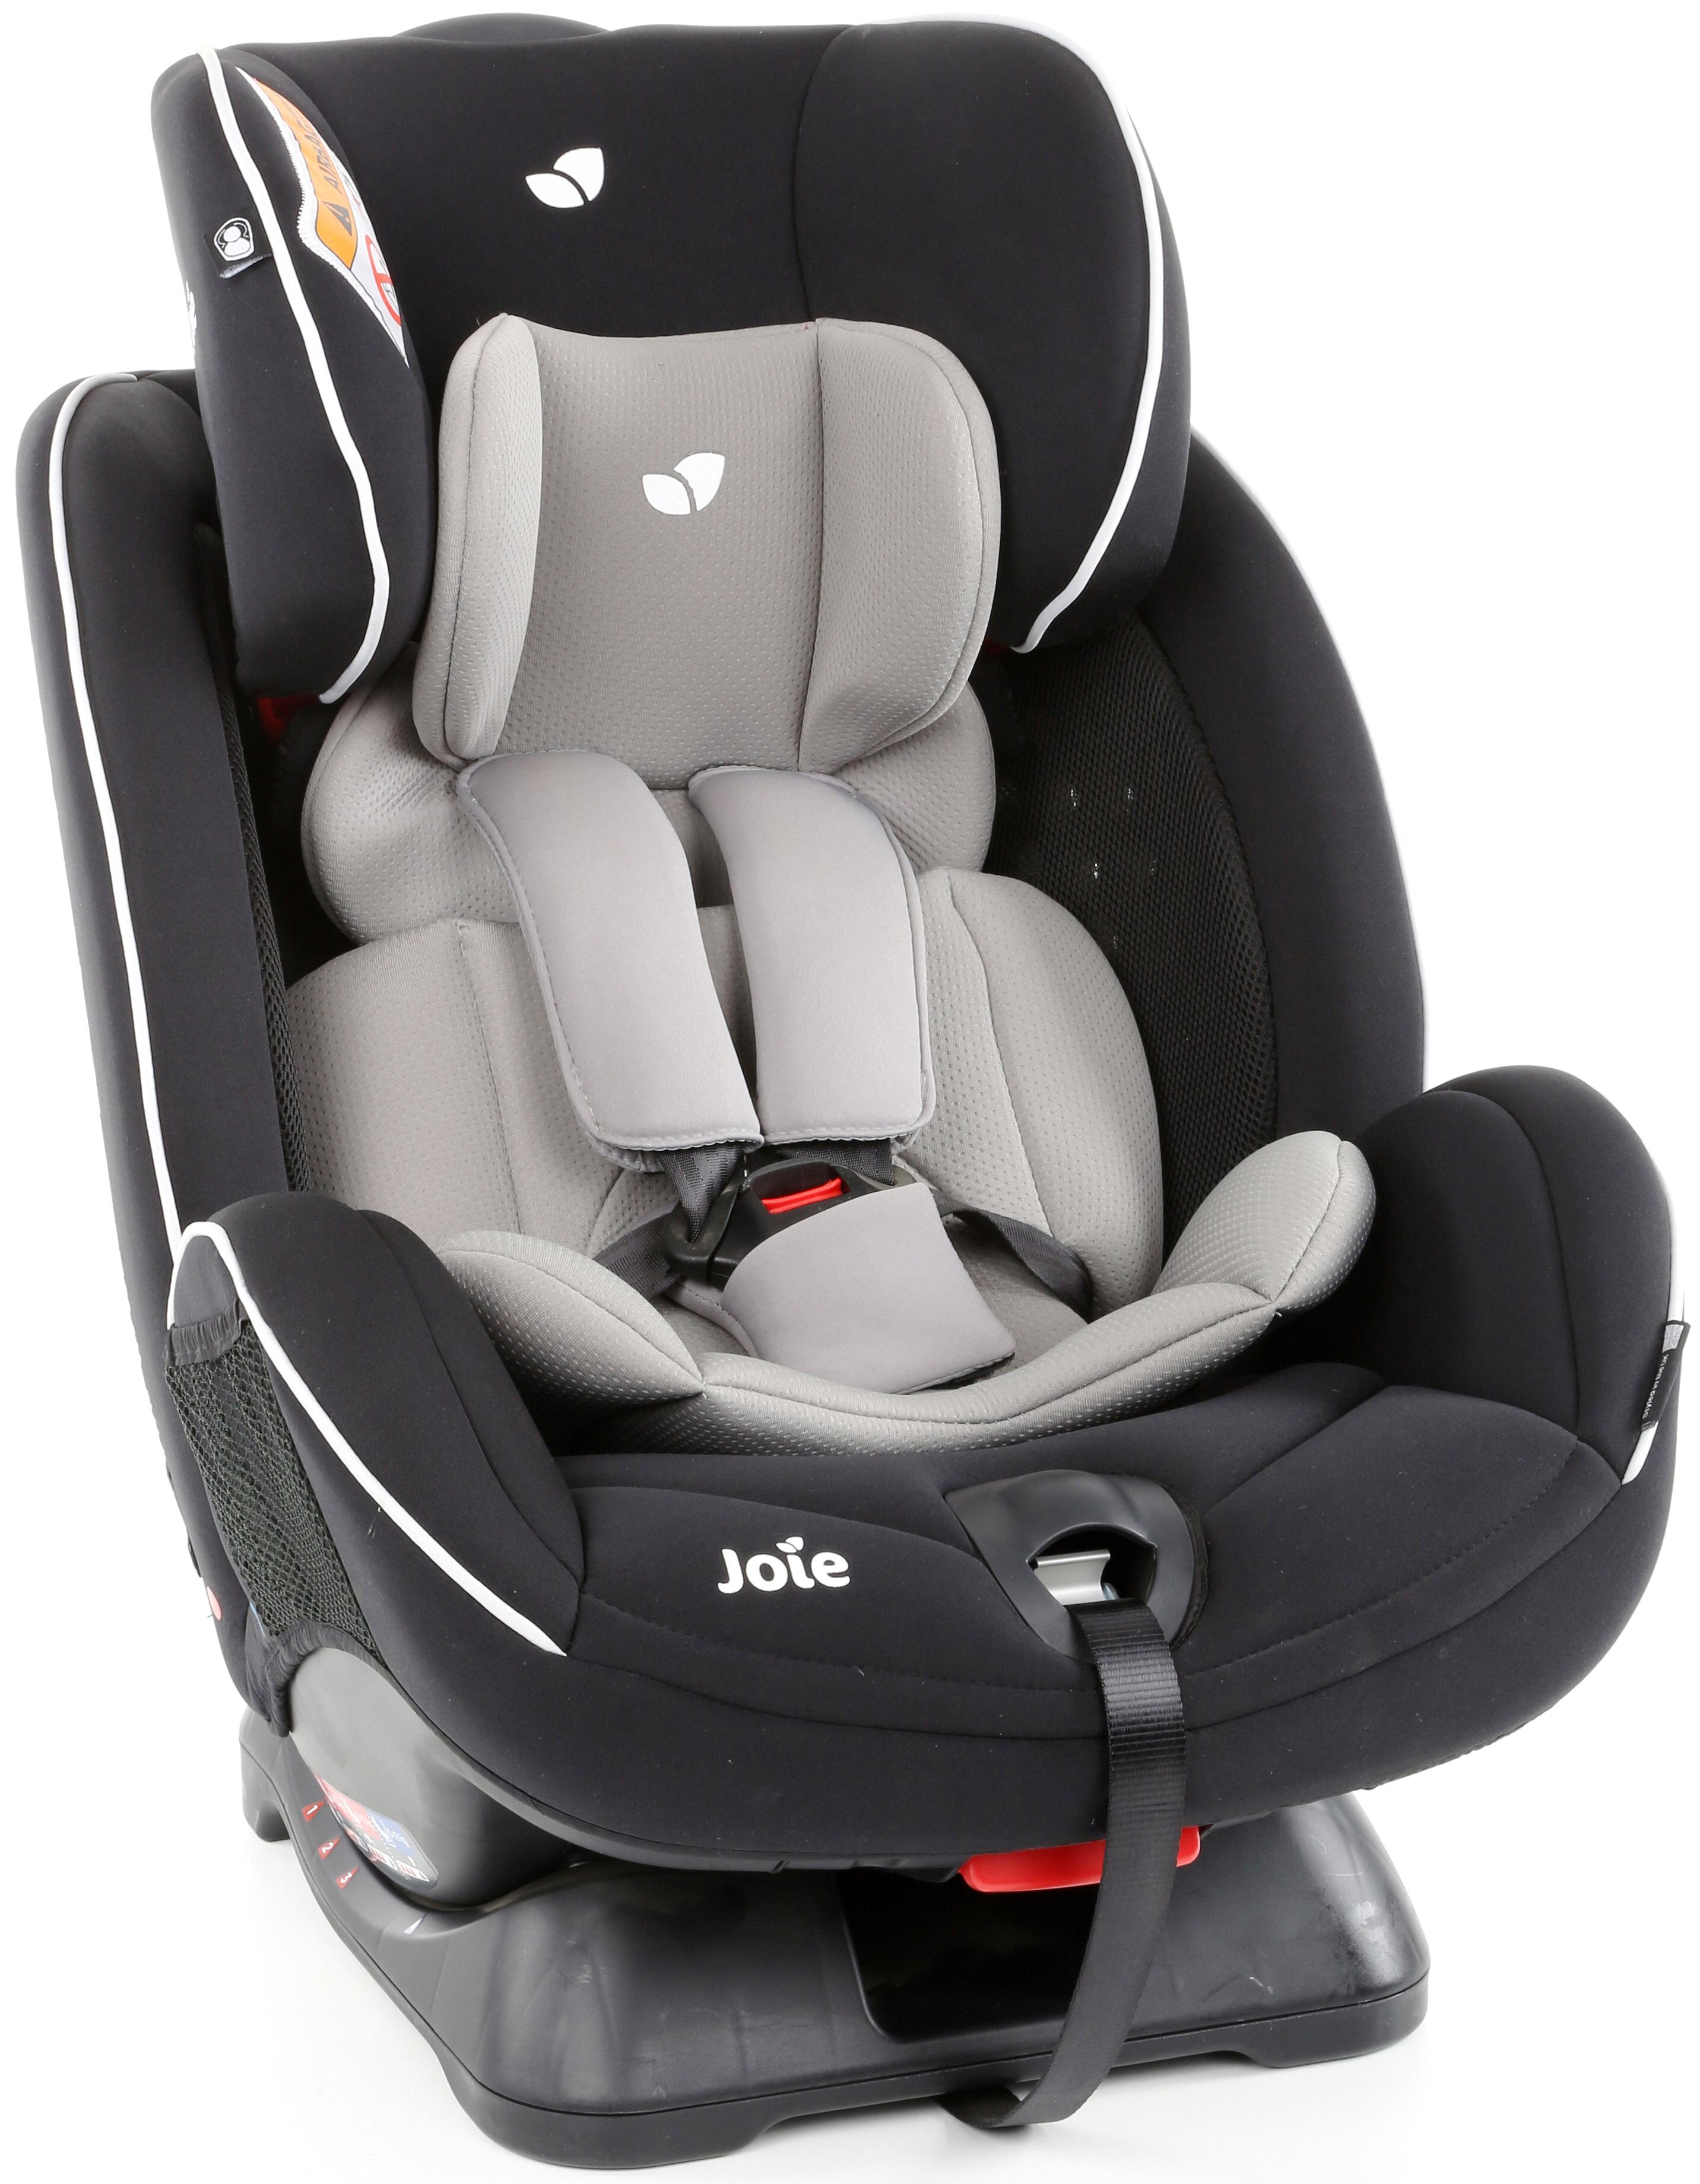 Joie Stage 0+/1/2 Child Car Seat 